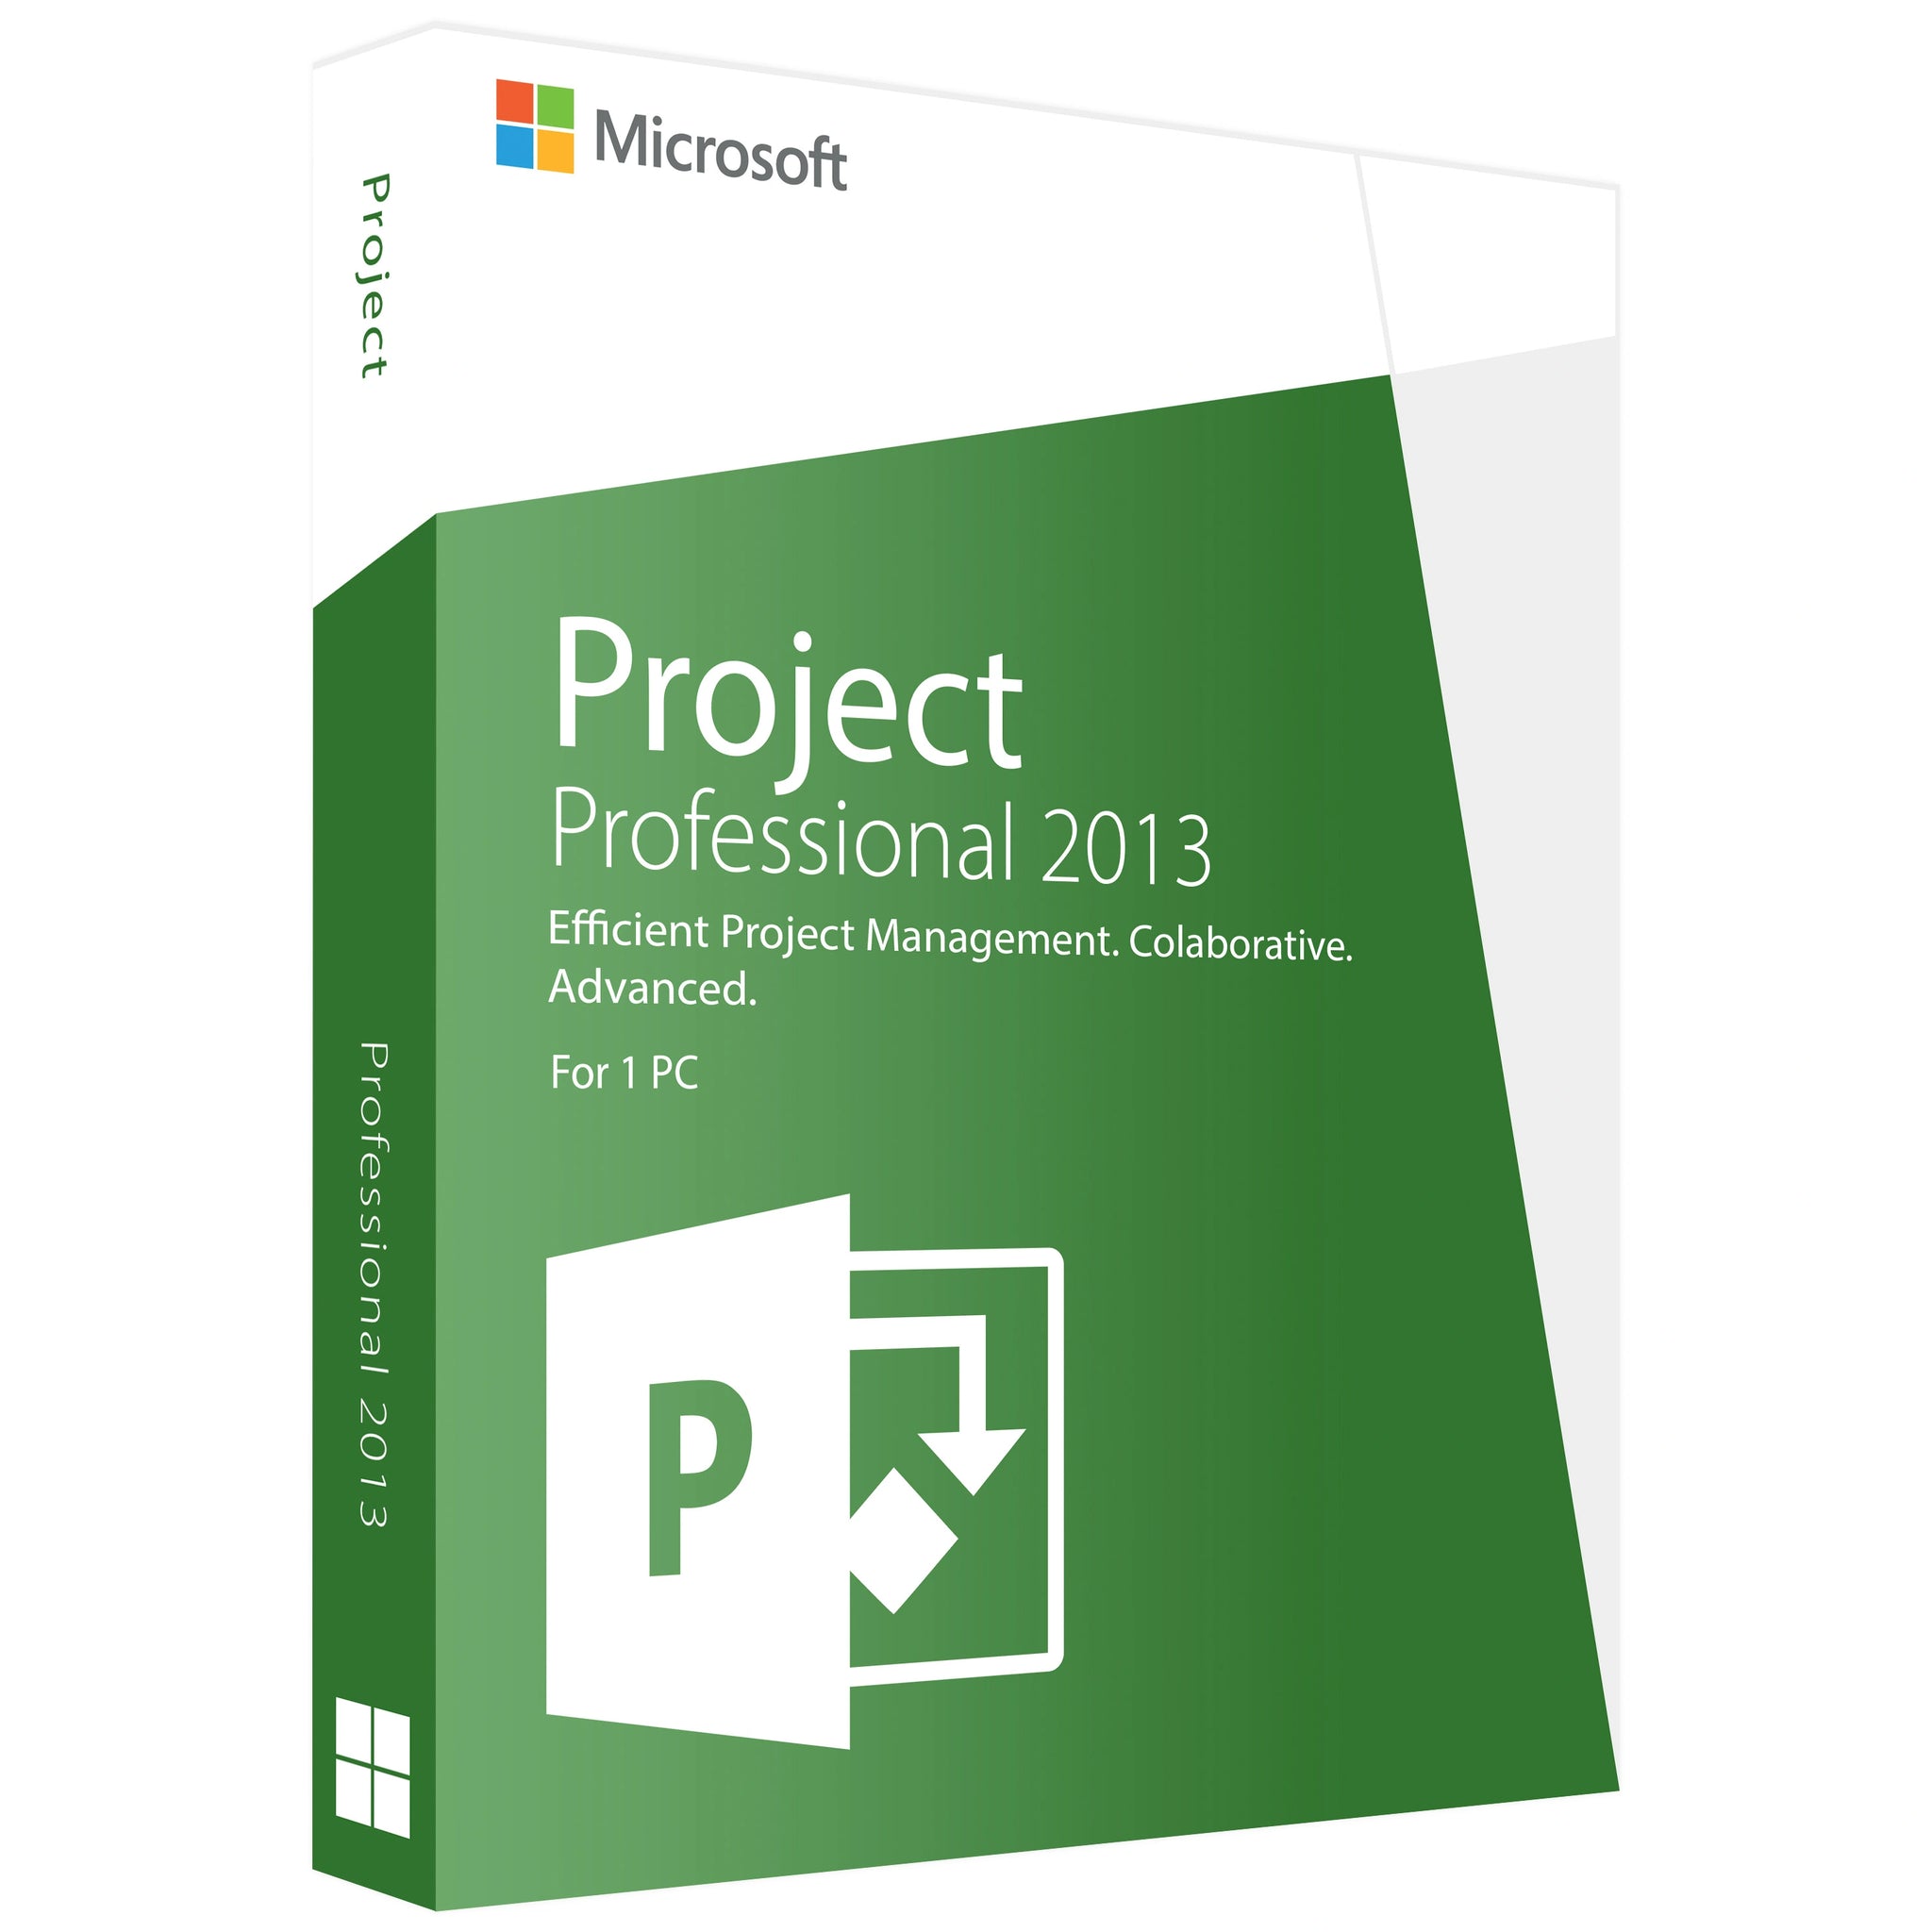 Microsoft Project 2013 Professional - Lifetime License Key for 1 PC